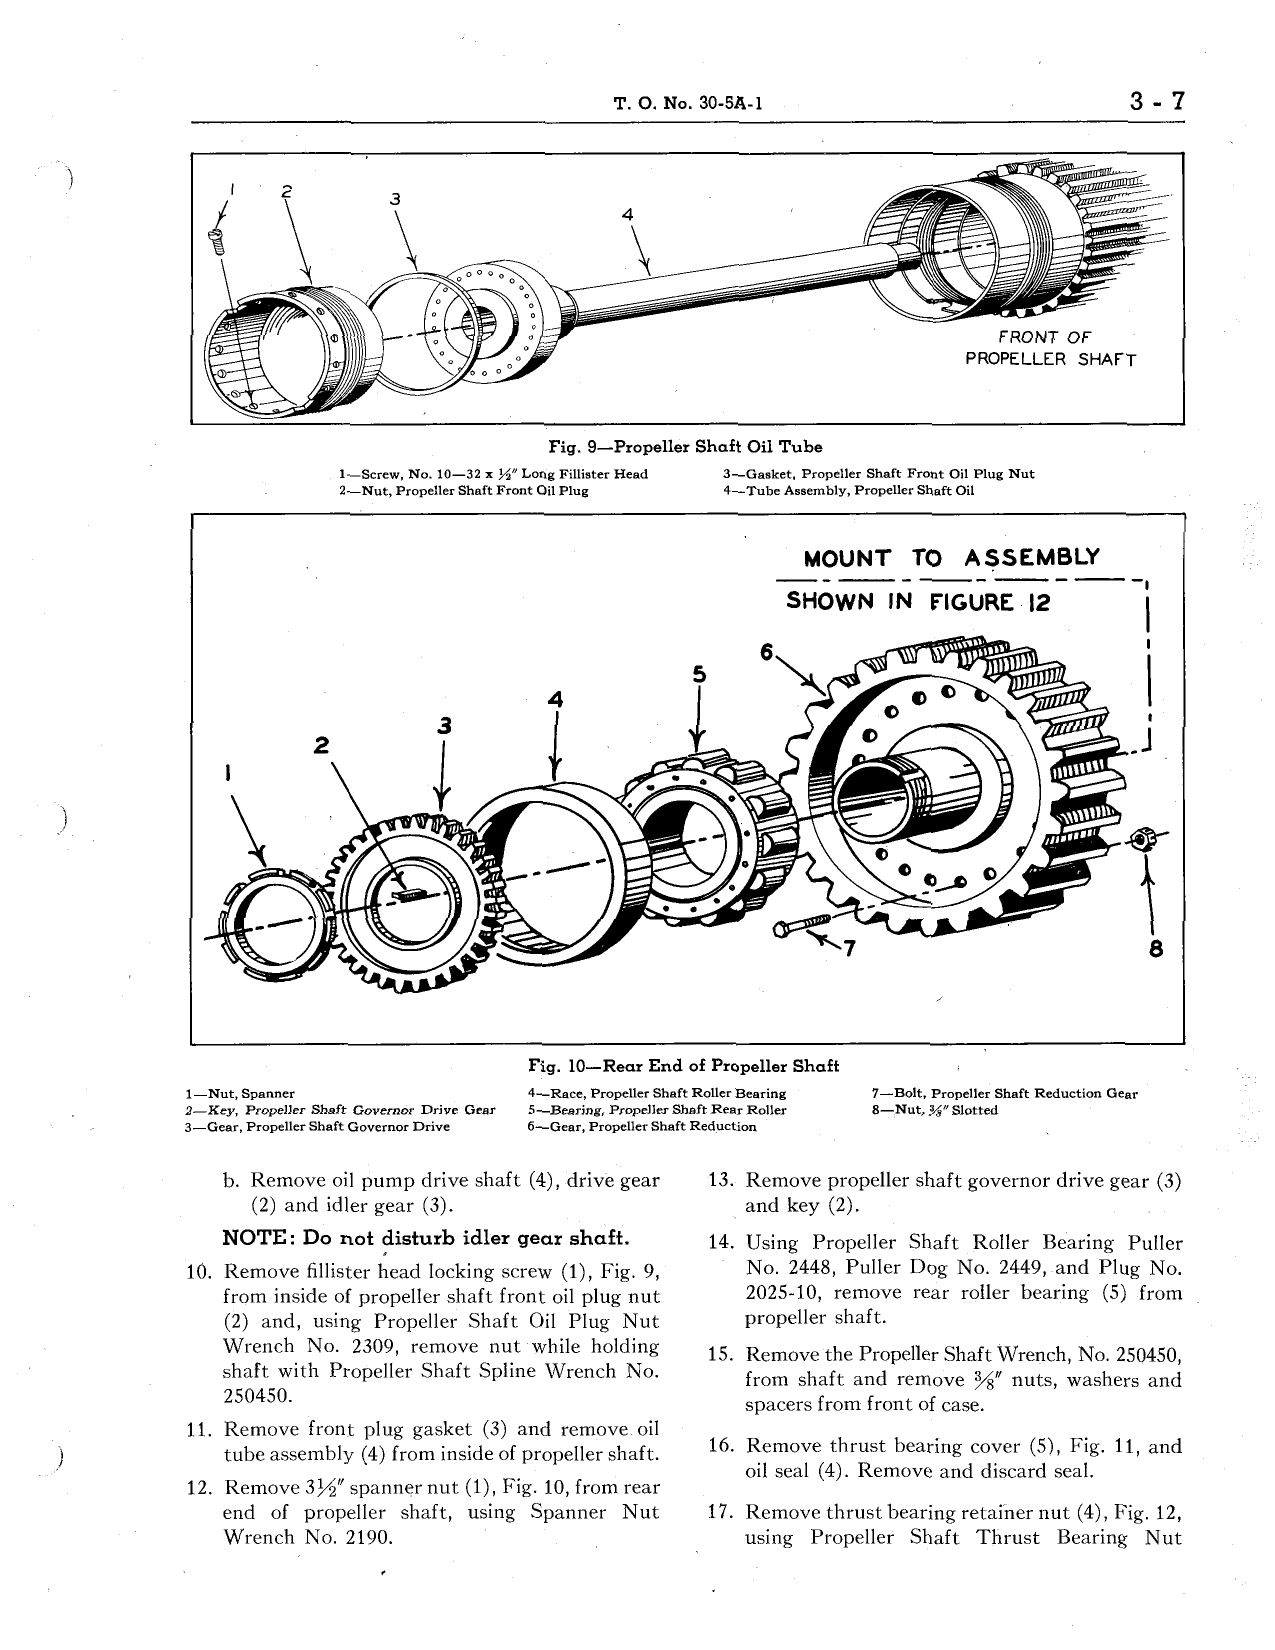 Sample page 42 from AirCorps Library document: Information Guide - Allison Engine V-1710E, V-1710F